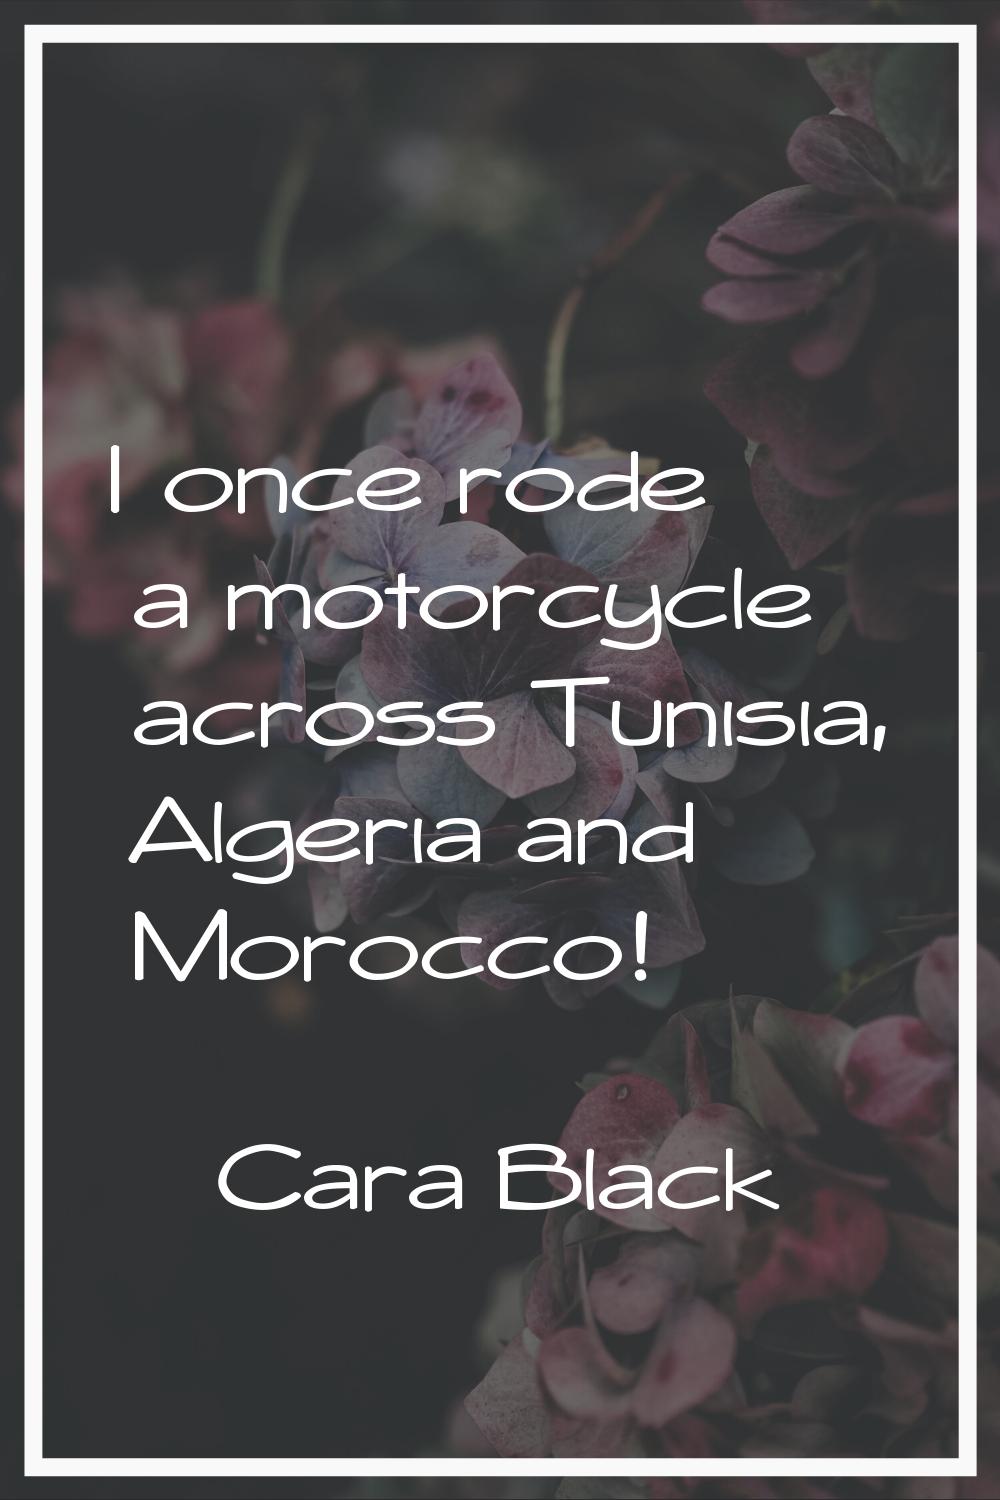 I once rode a motorcycle across Tunisia, Algeria and Morocco!